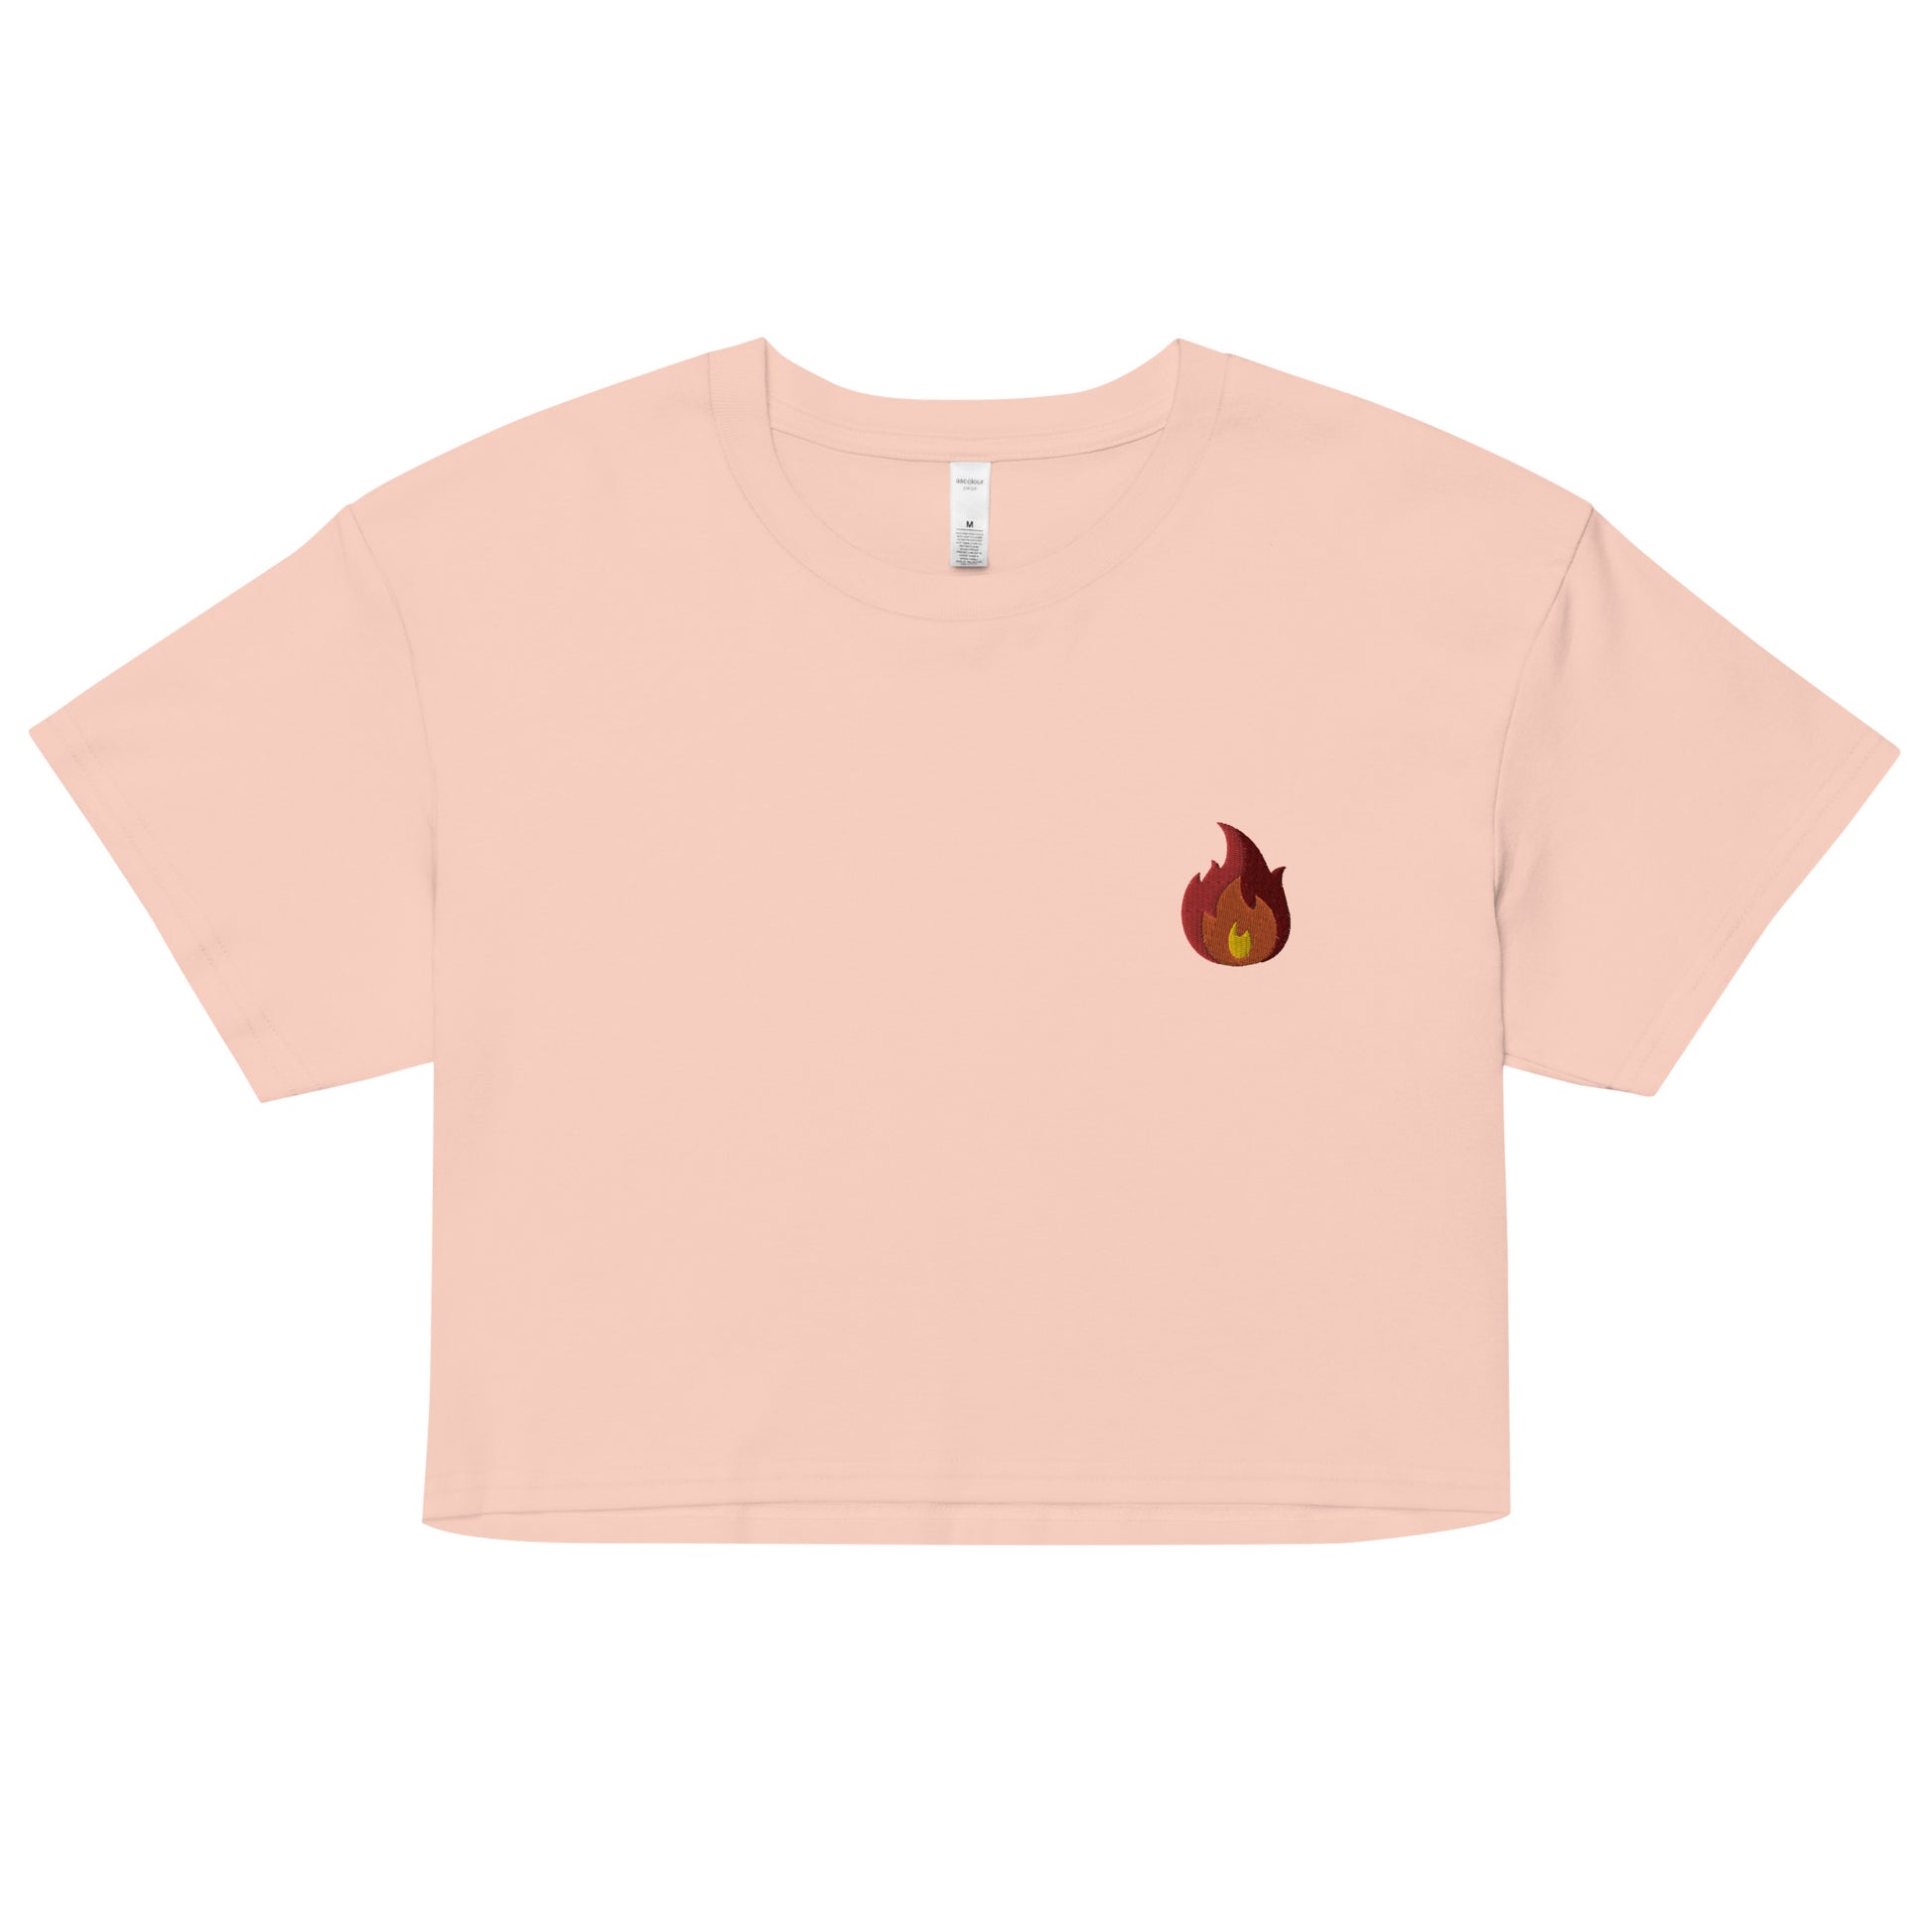 A relaxed Pale Pink crop top features a modest crop and subtle fire emoji embroidered design, adding a touch of mischief to your look—a playful celebration of gay culture! Made from 100% combed cotton. Available in Extra Small, Small, Medium, Large, Extra Large.